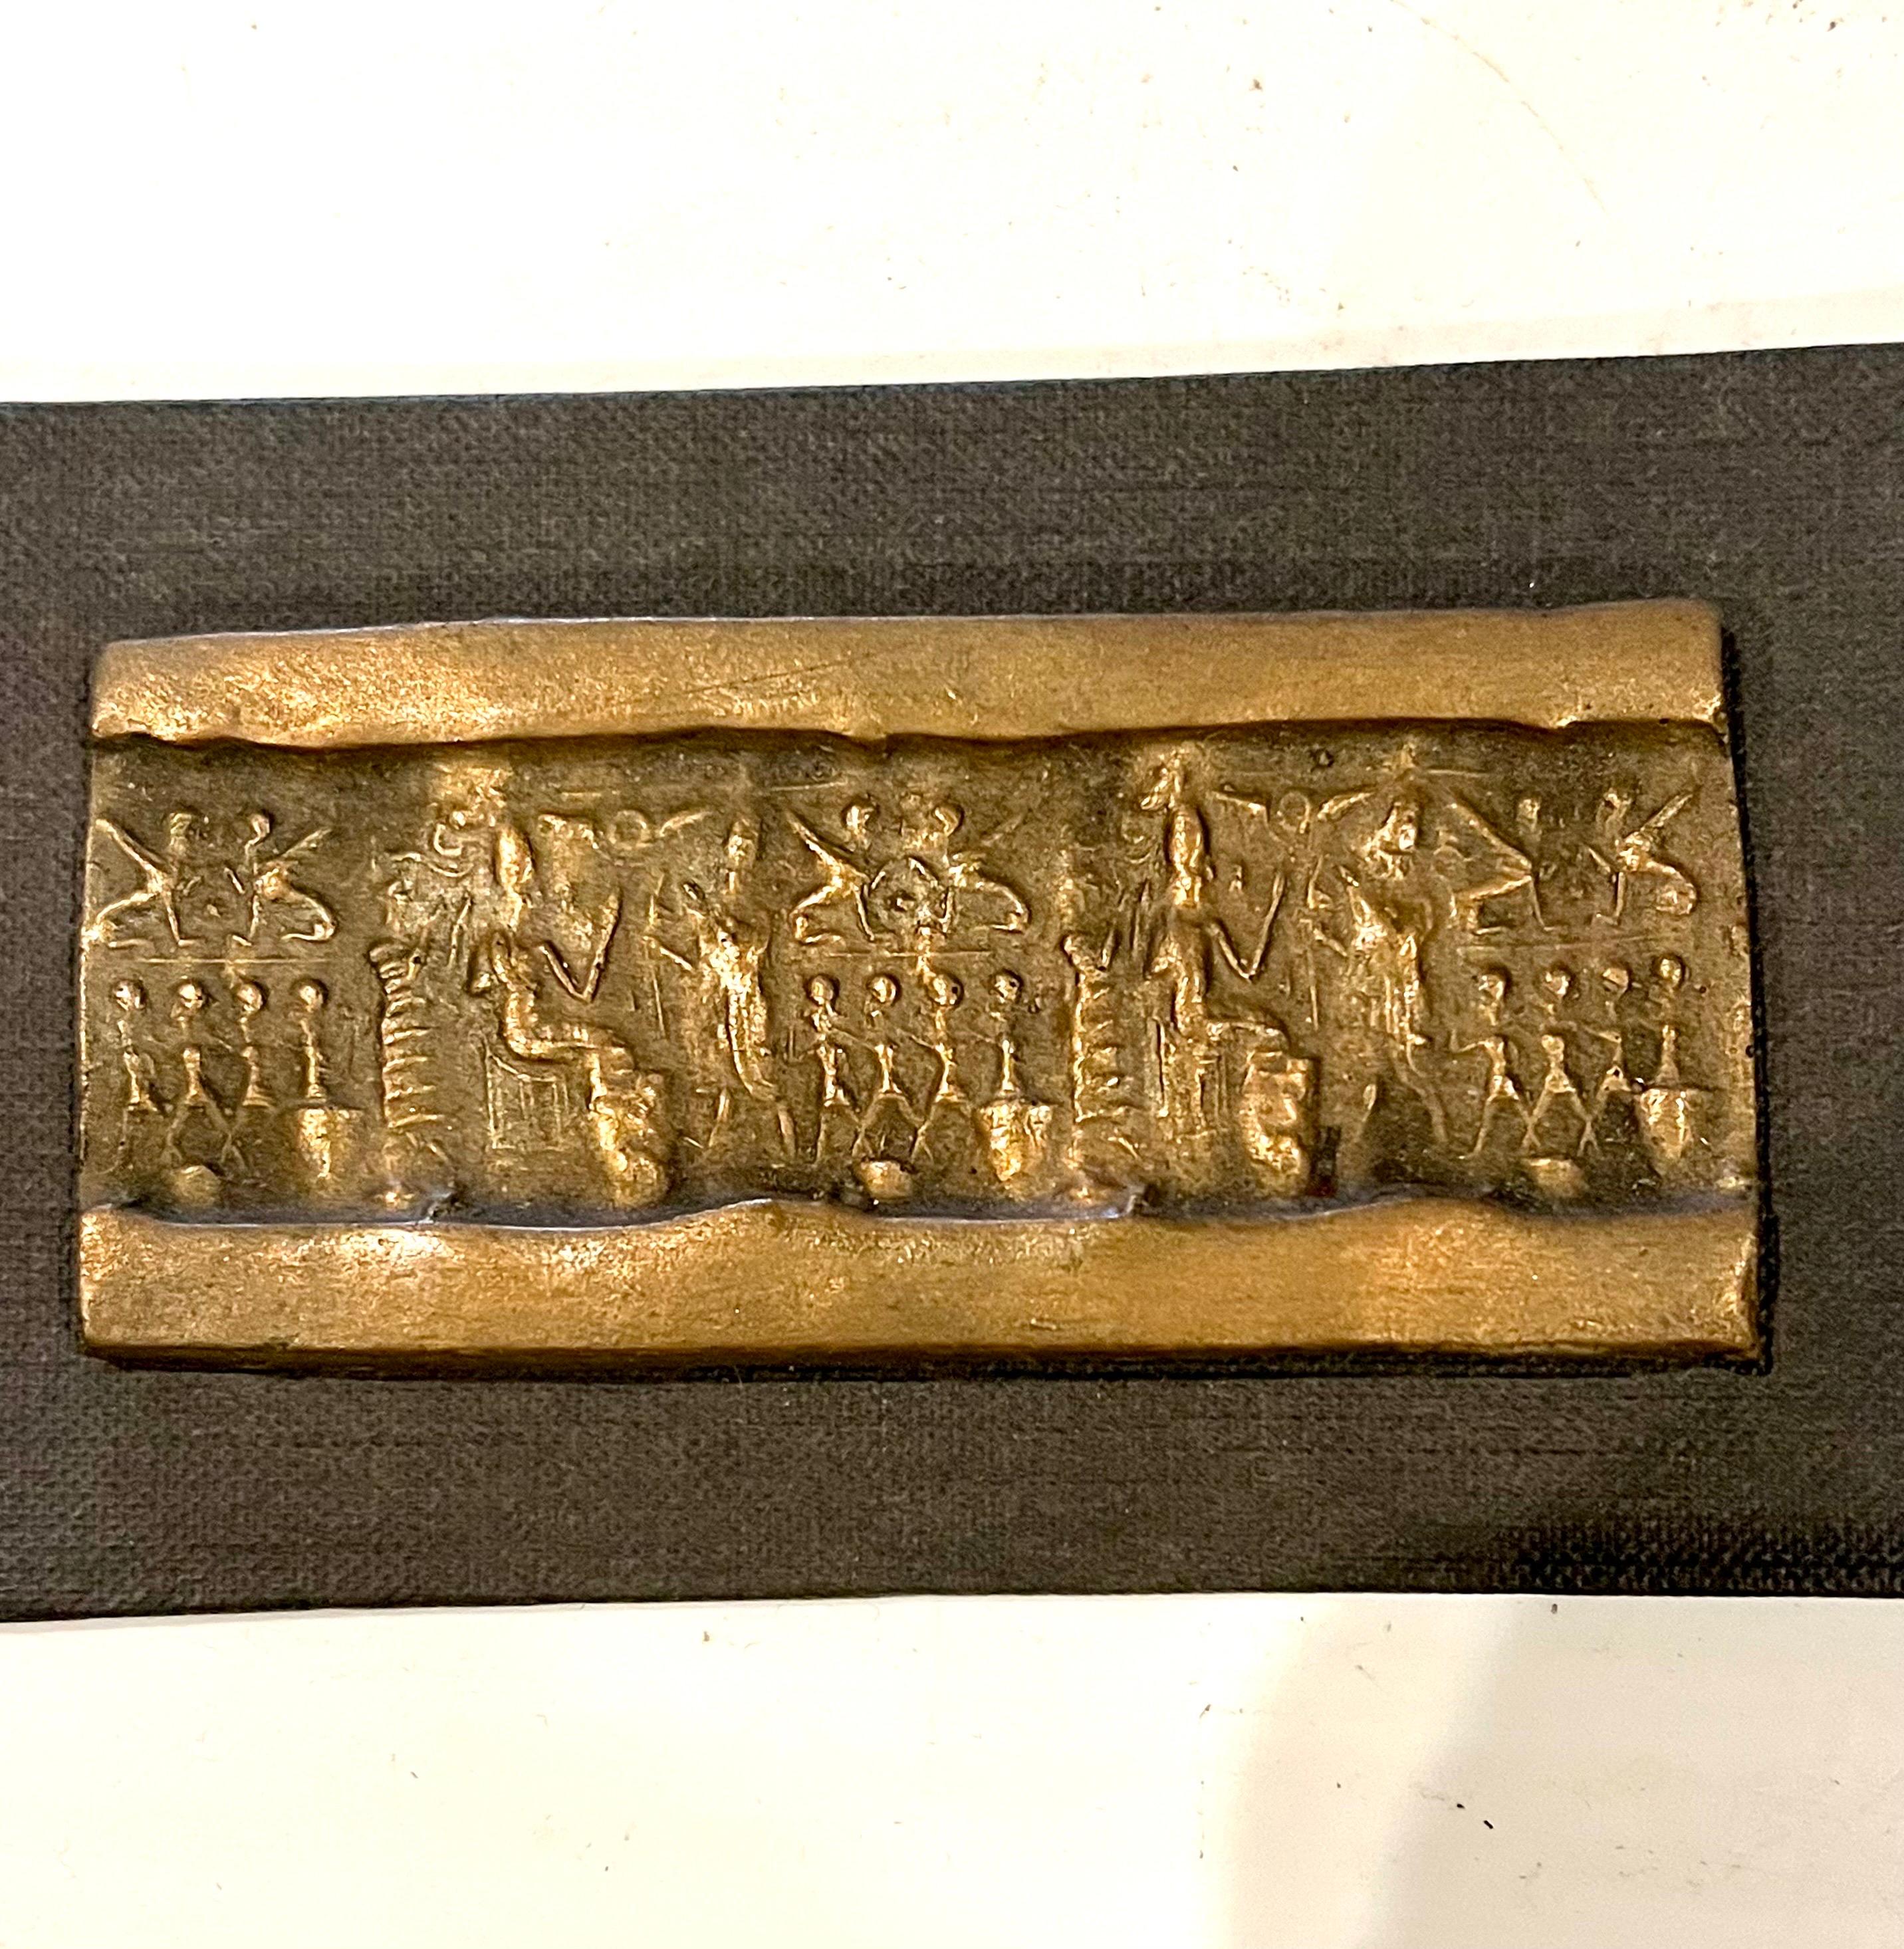 Beautiful rare bronze sculpture seal mounted on black cardboard new and never used, late Canaanite period 13th century BCE. Hazor the bronze plaque its 4' x 1.75